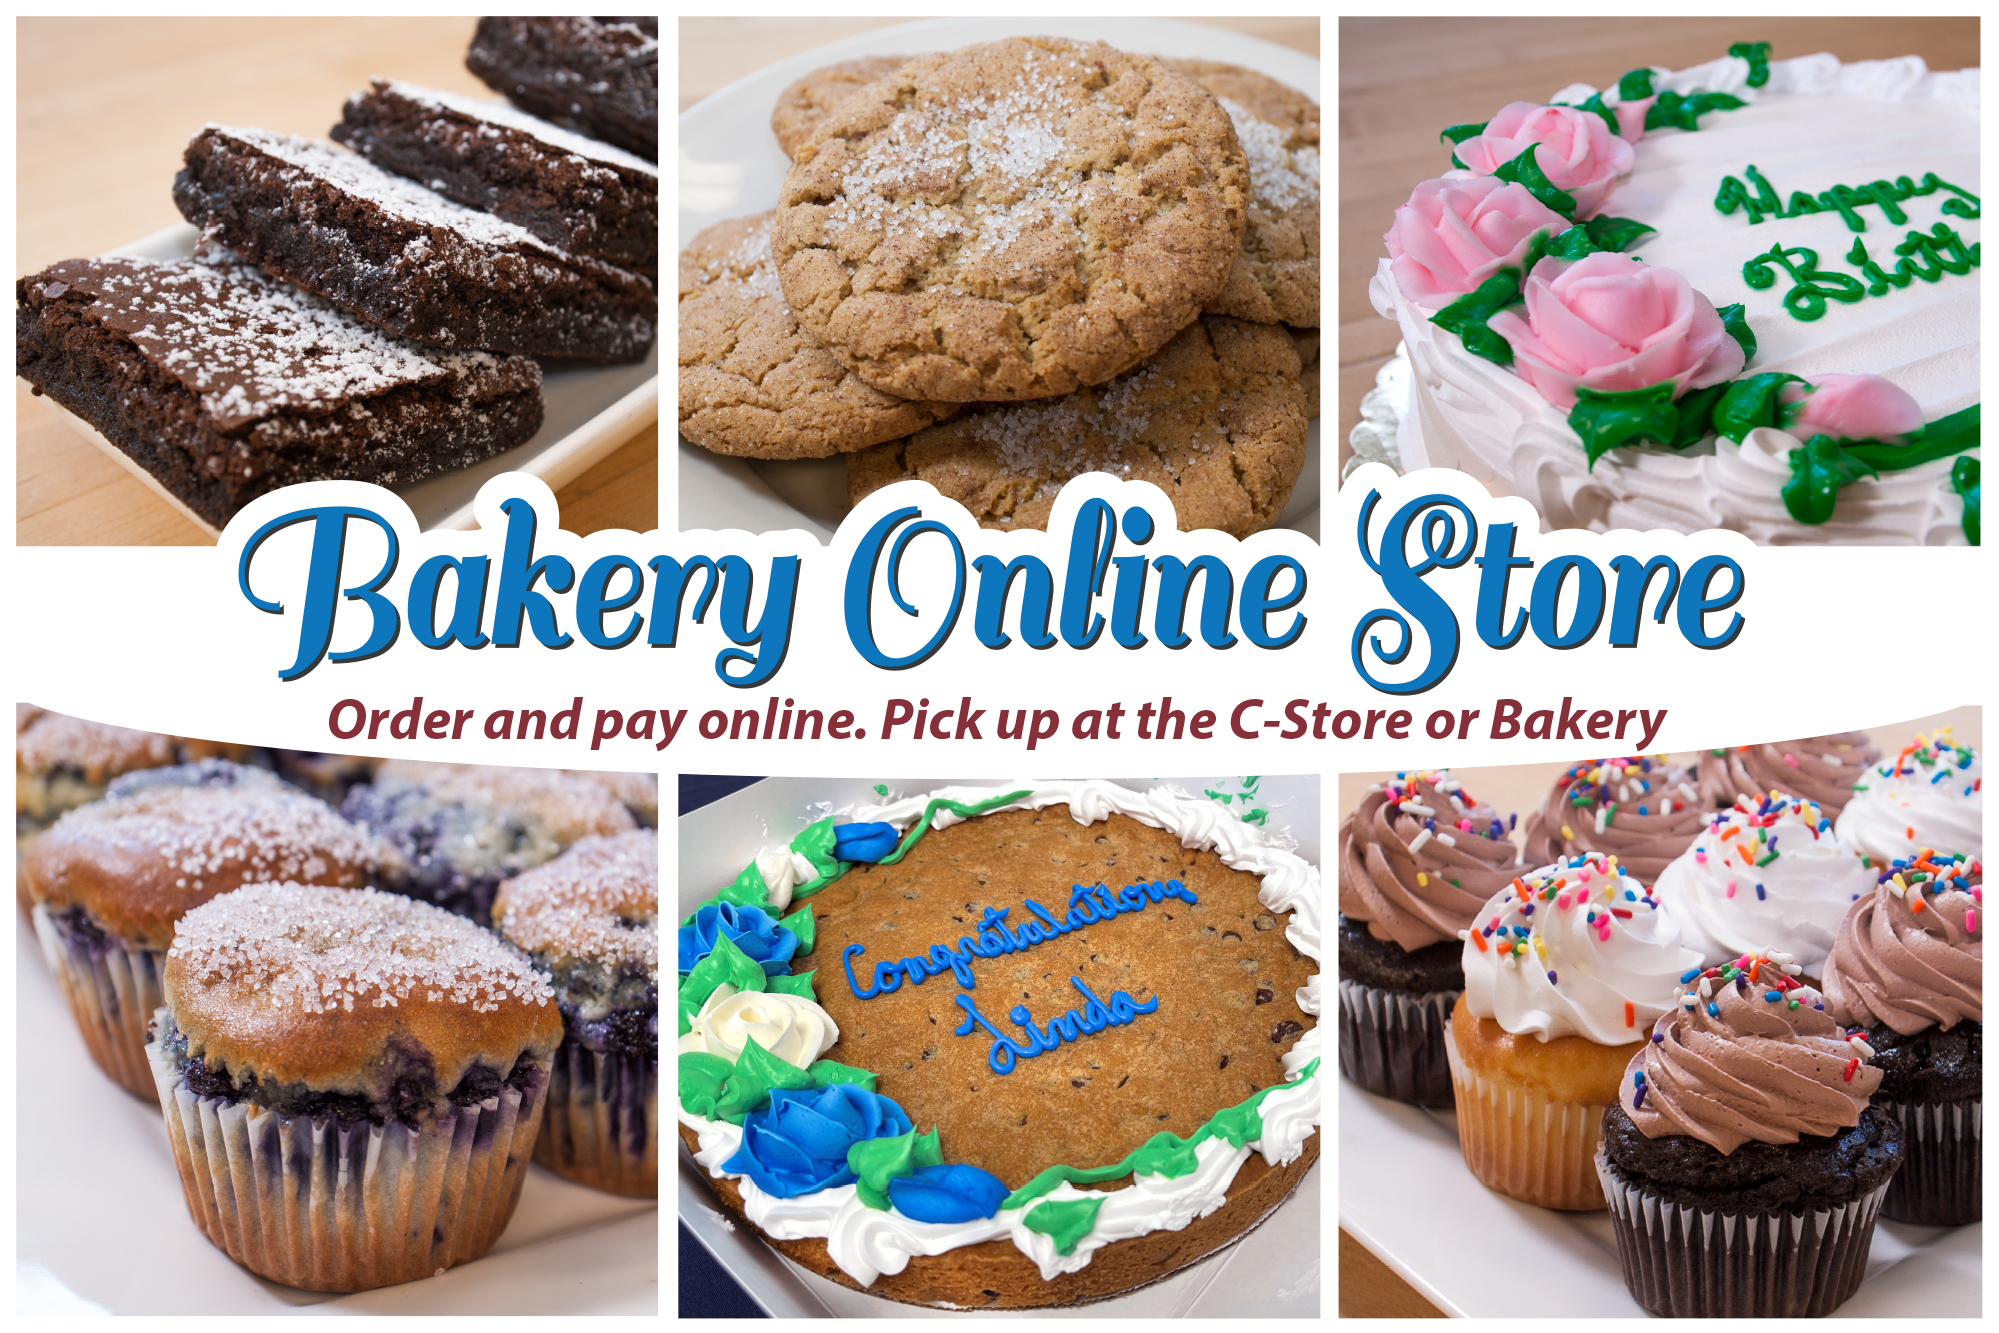 Students and staff can order cakes, and baked goods, including gluten free from the UConn Bakery